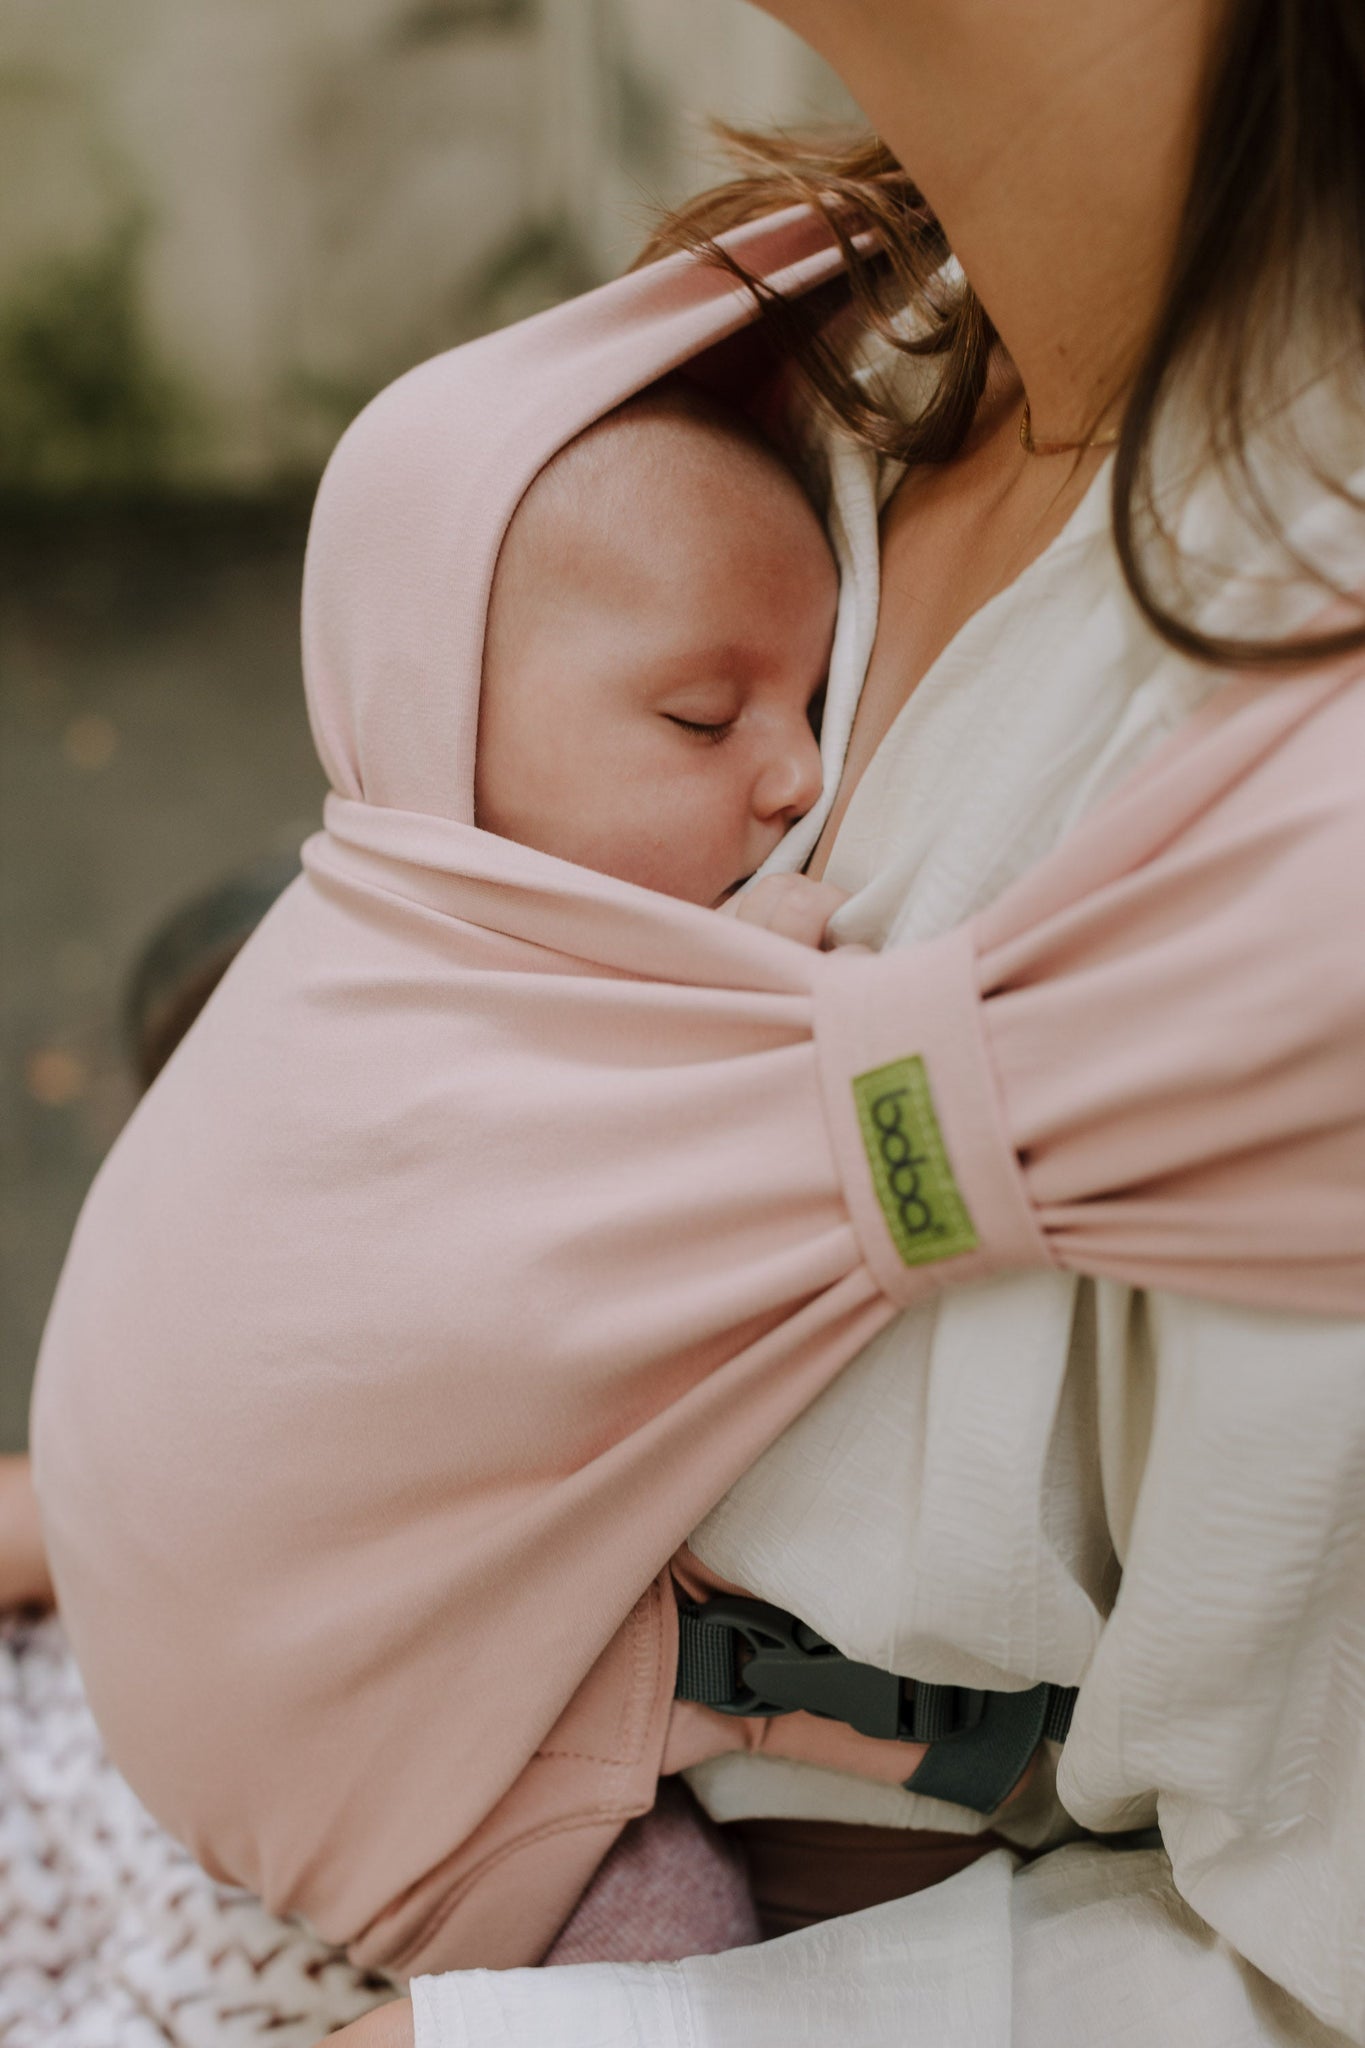 Boba Bliss Hybrid Newborn Wrap Carrier, Cloth and Carry